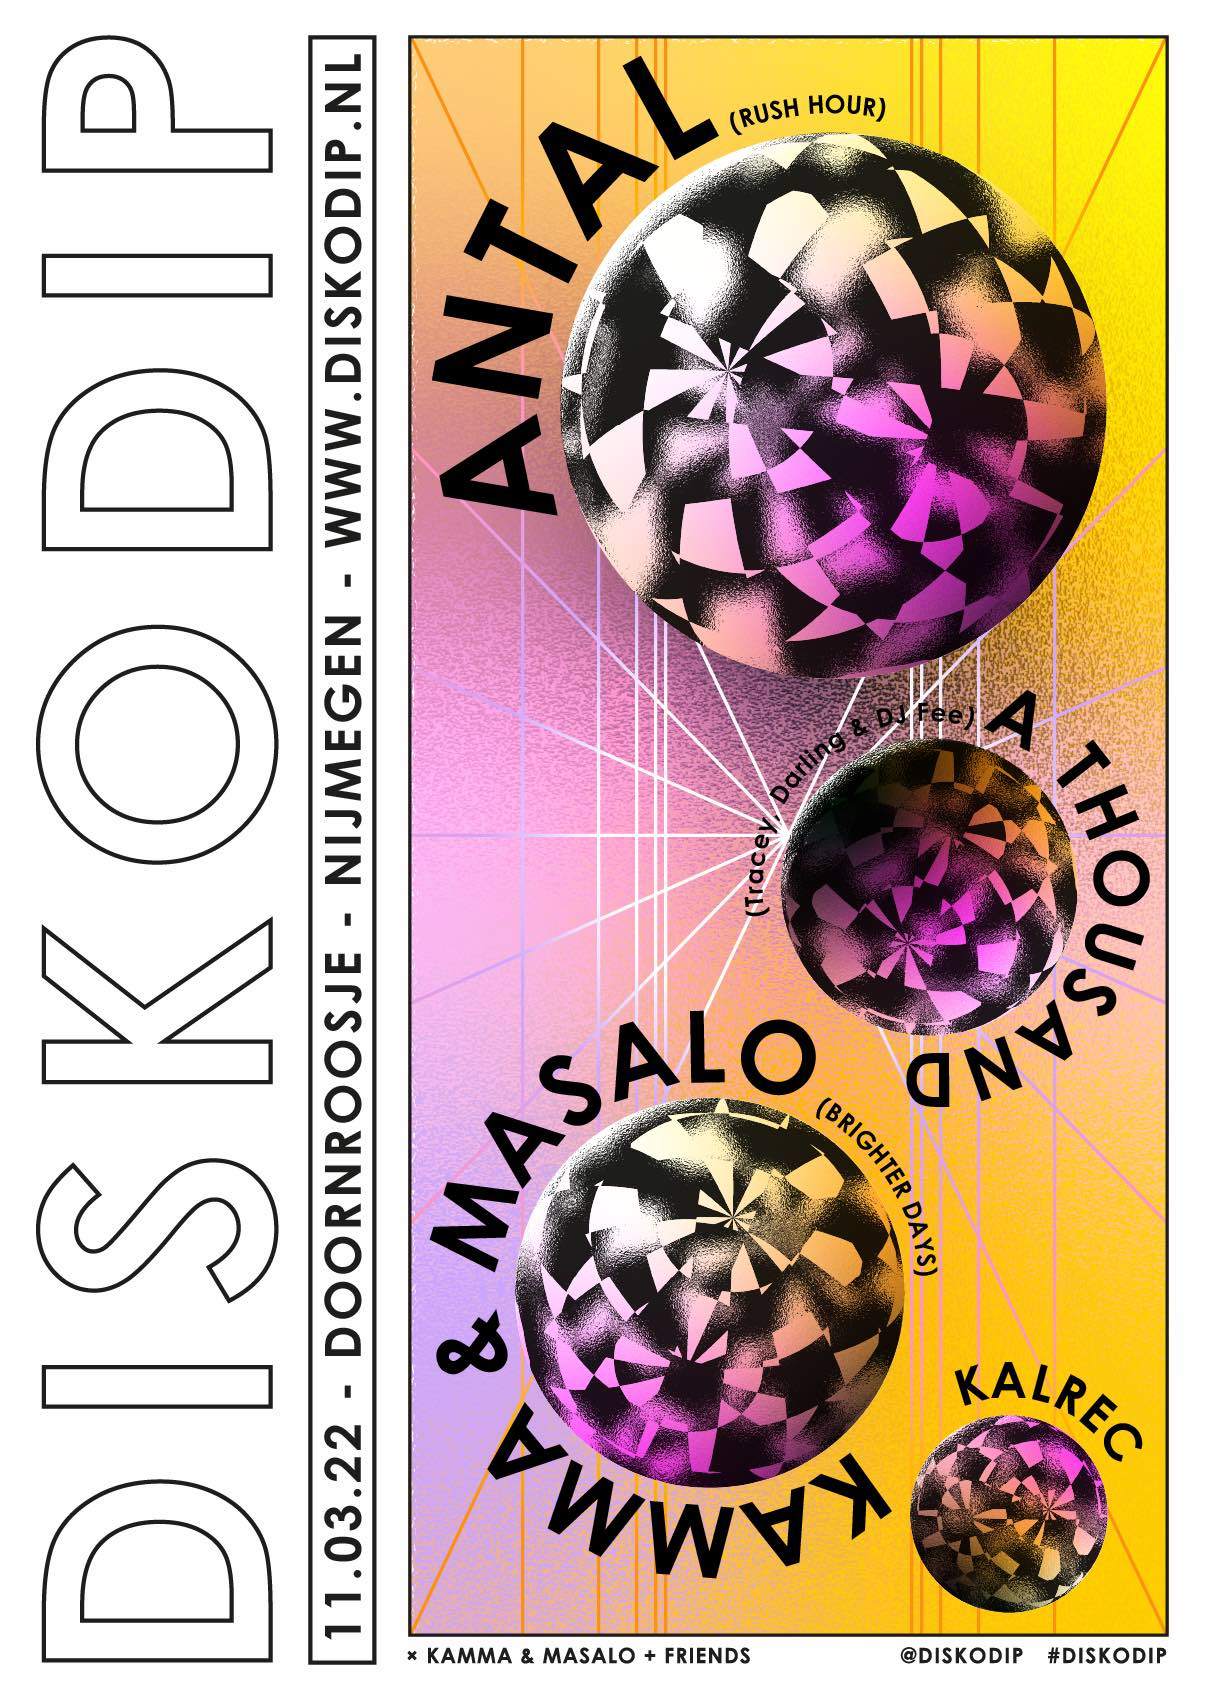 Diskodip X Kamma & Masalo and Friends with Antal - フライヤー表